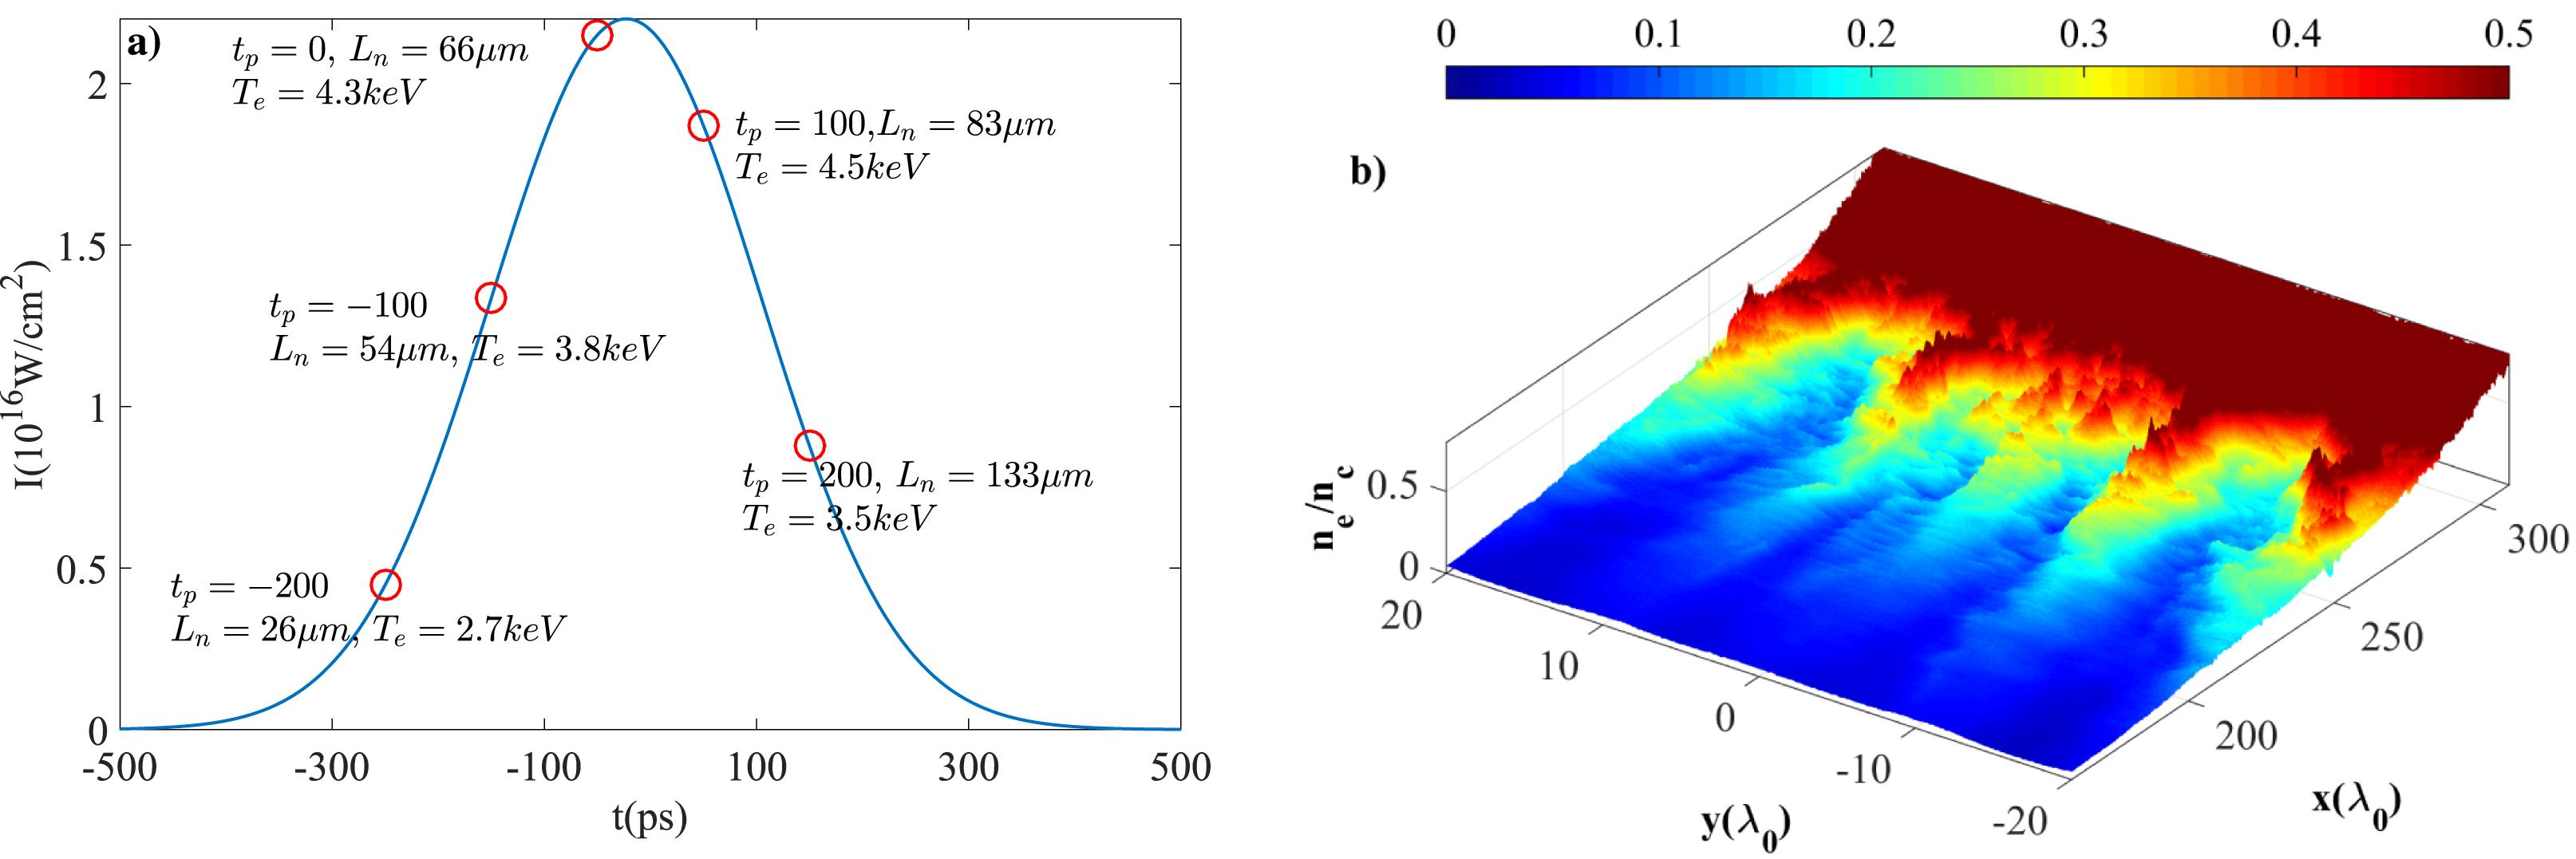 (a) The pulse shape and the selected representative points for the kinetic simulations. (b) Typical filamentation structure observed in our simulations and represented by the electron density distribution at the time corresponding to the laser pulse maximum in panel (a).